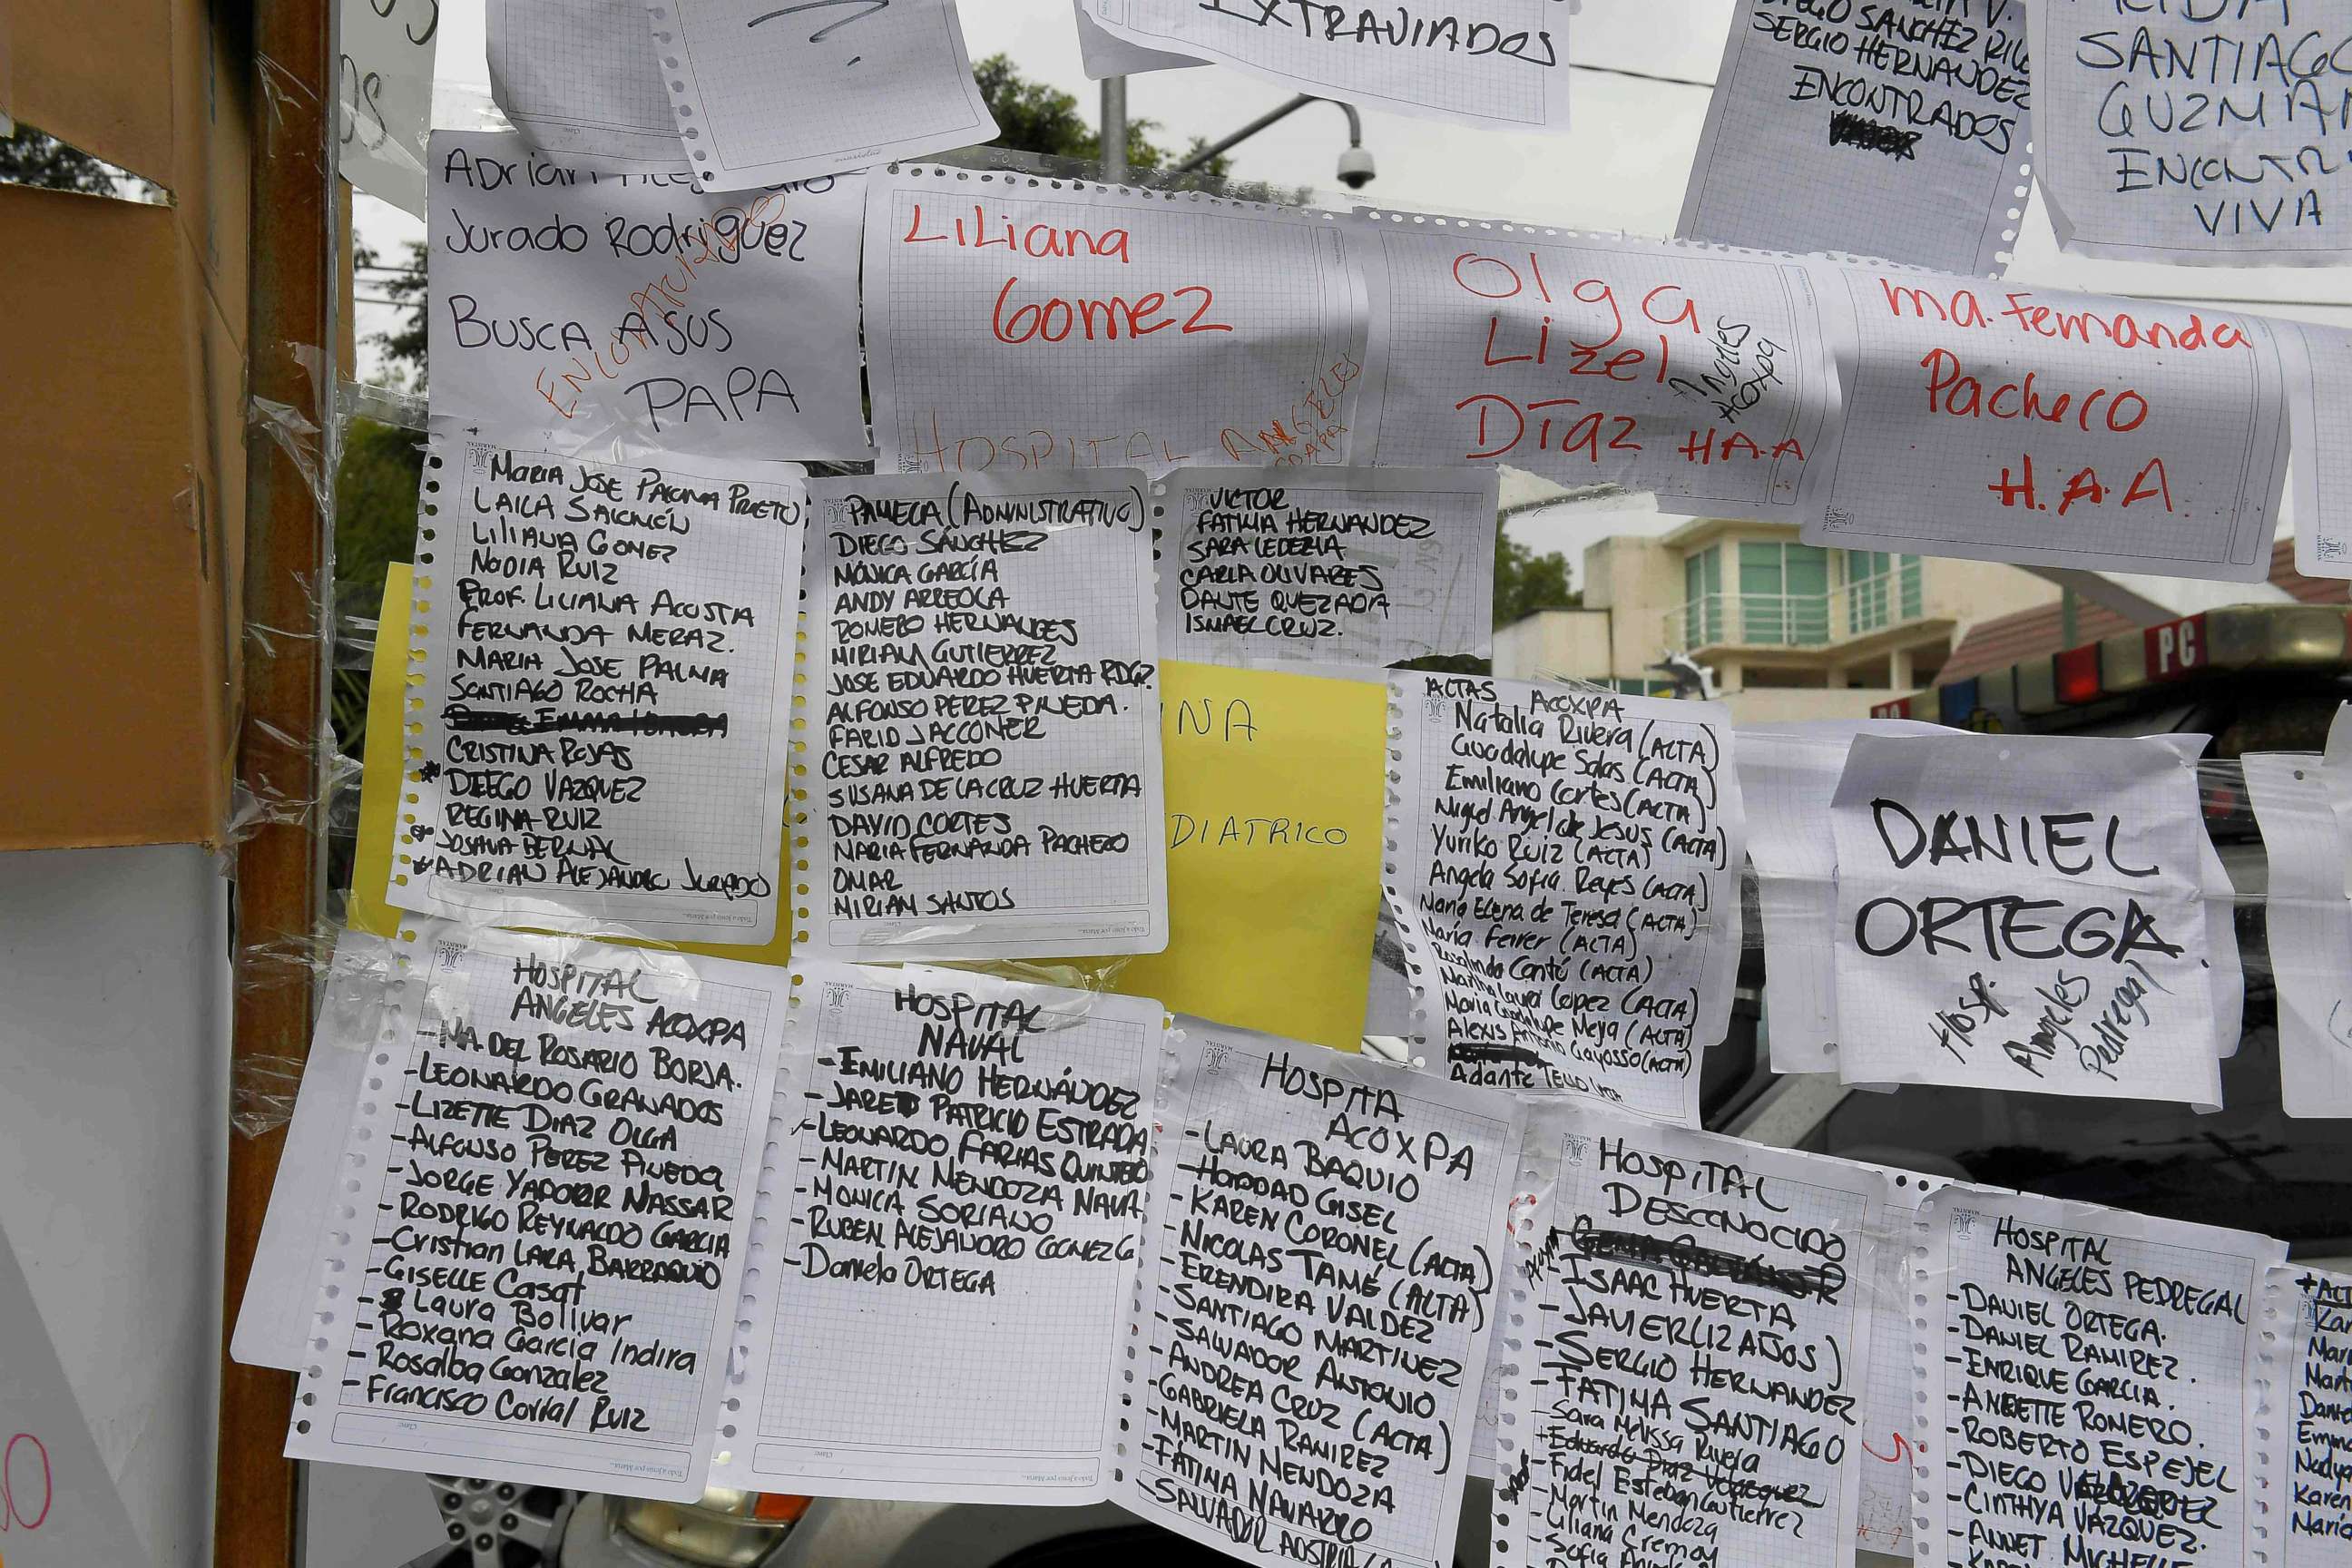 PHOTO: Sheets of paper display names and lists of people and the hospitals they are in, near a school where at least 21 children died and 30 are missing in Mexico City on Sept. 20, 2017.